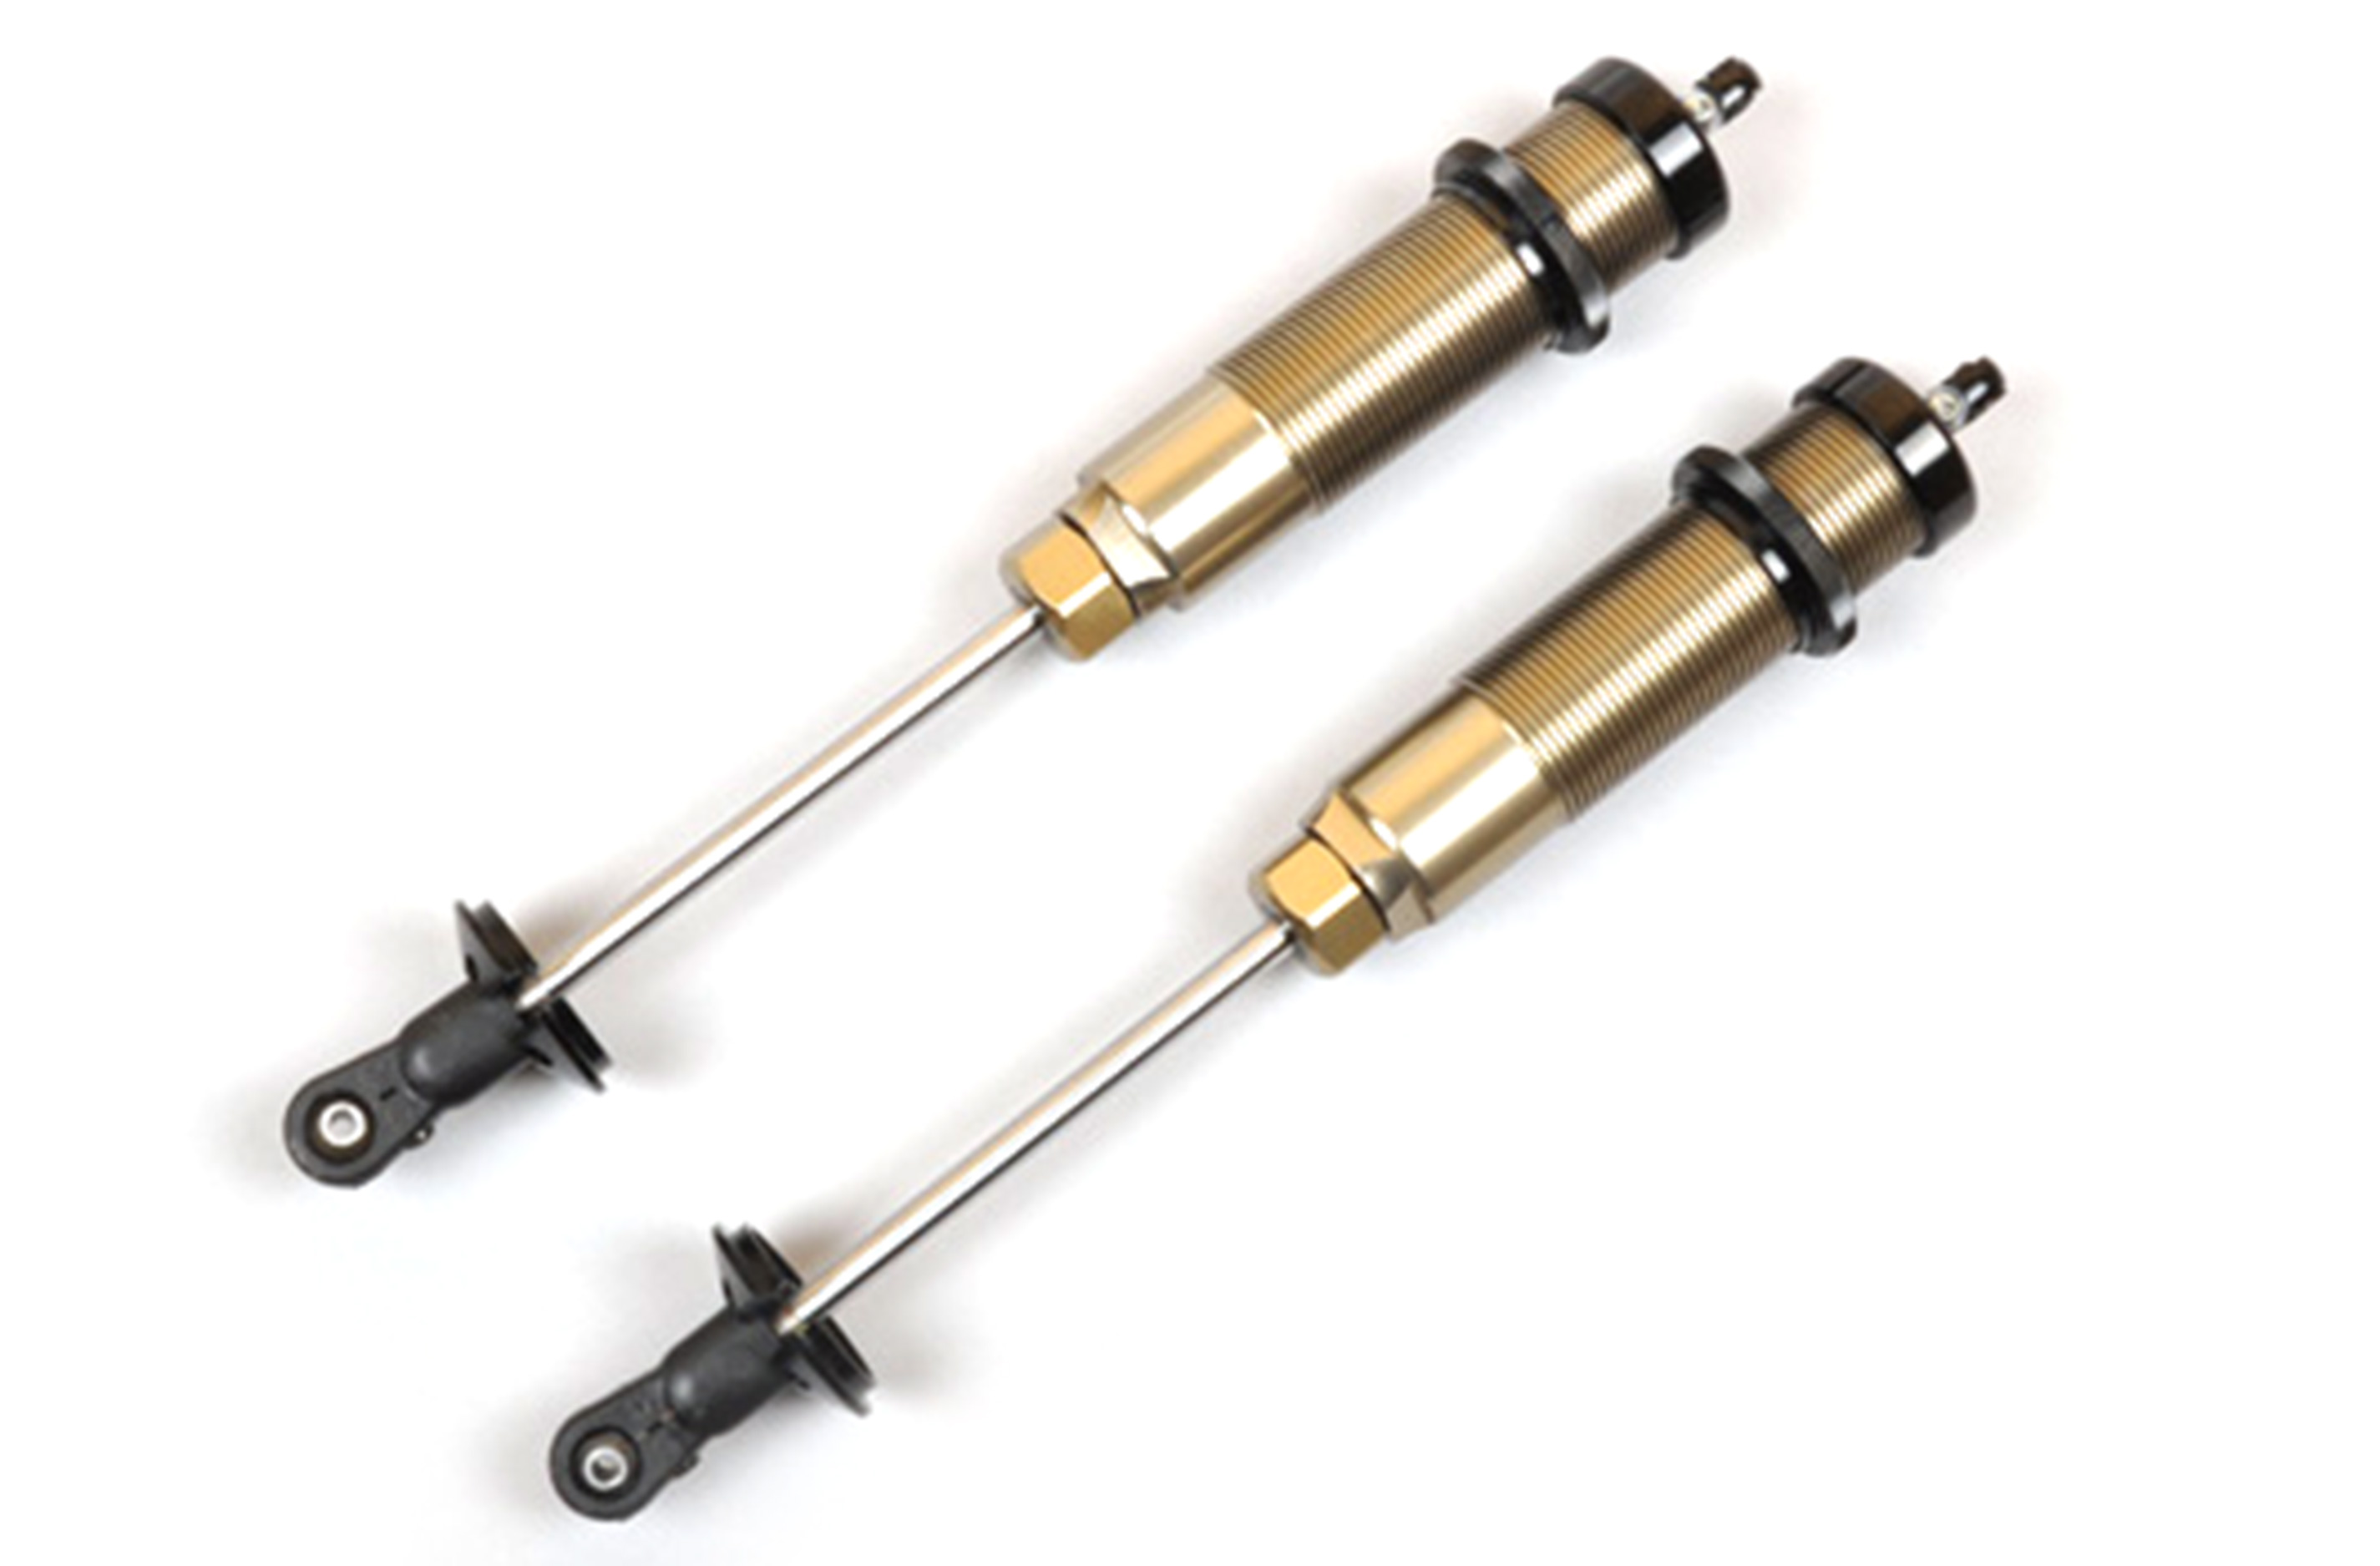 67331 FG Big Bore shock absorbers Competition, fit on Leopard Competition chassis